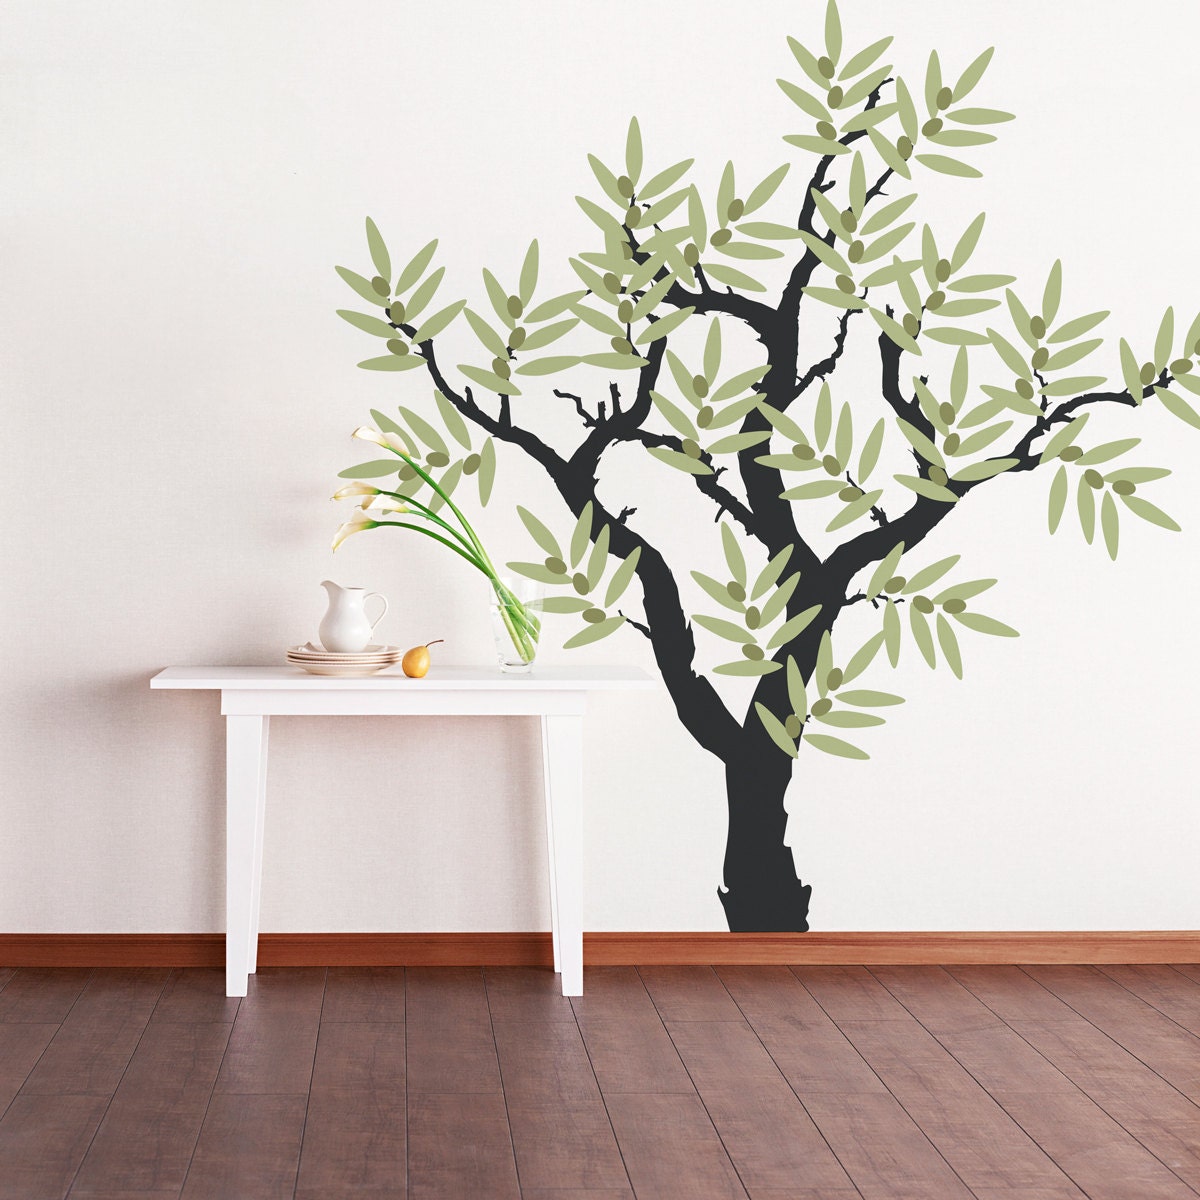 Olive Green Wall Decor Plus More Tree Wall Art for Family Room or Live Room Decor Wall Sticker Decal 